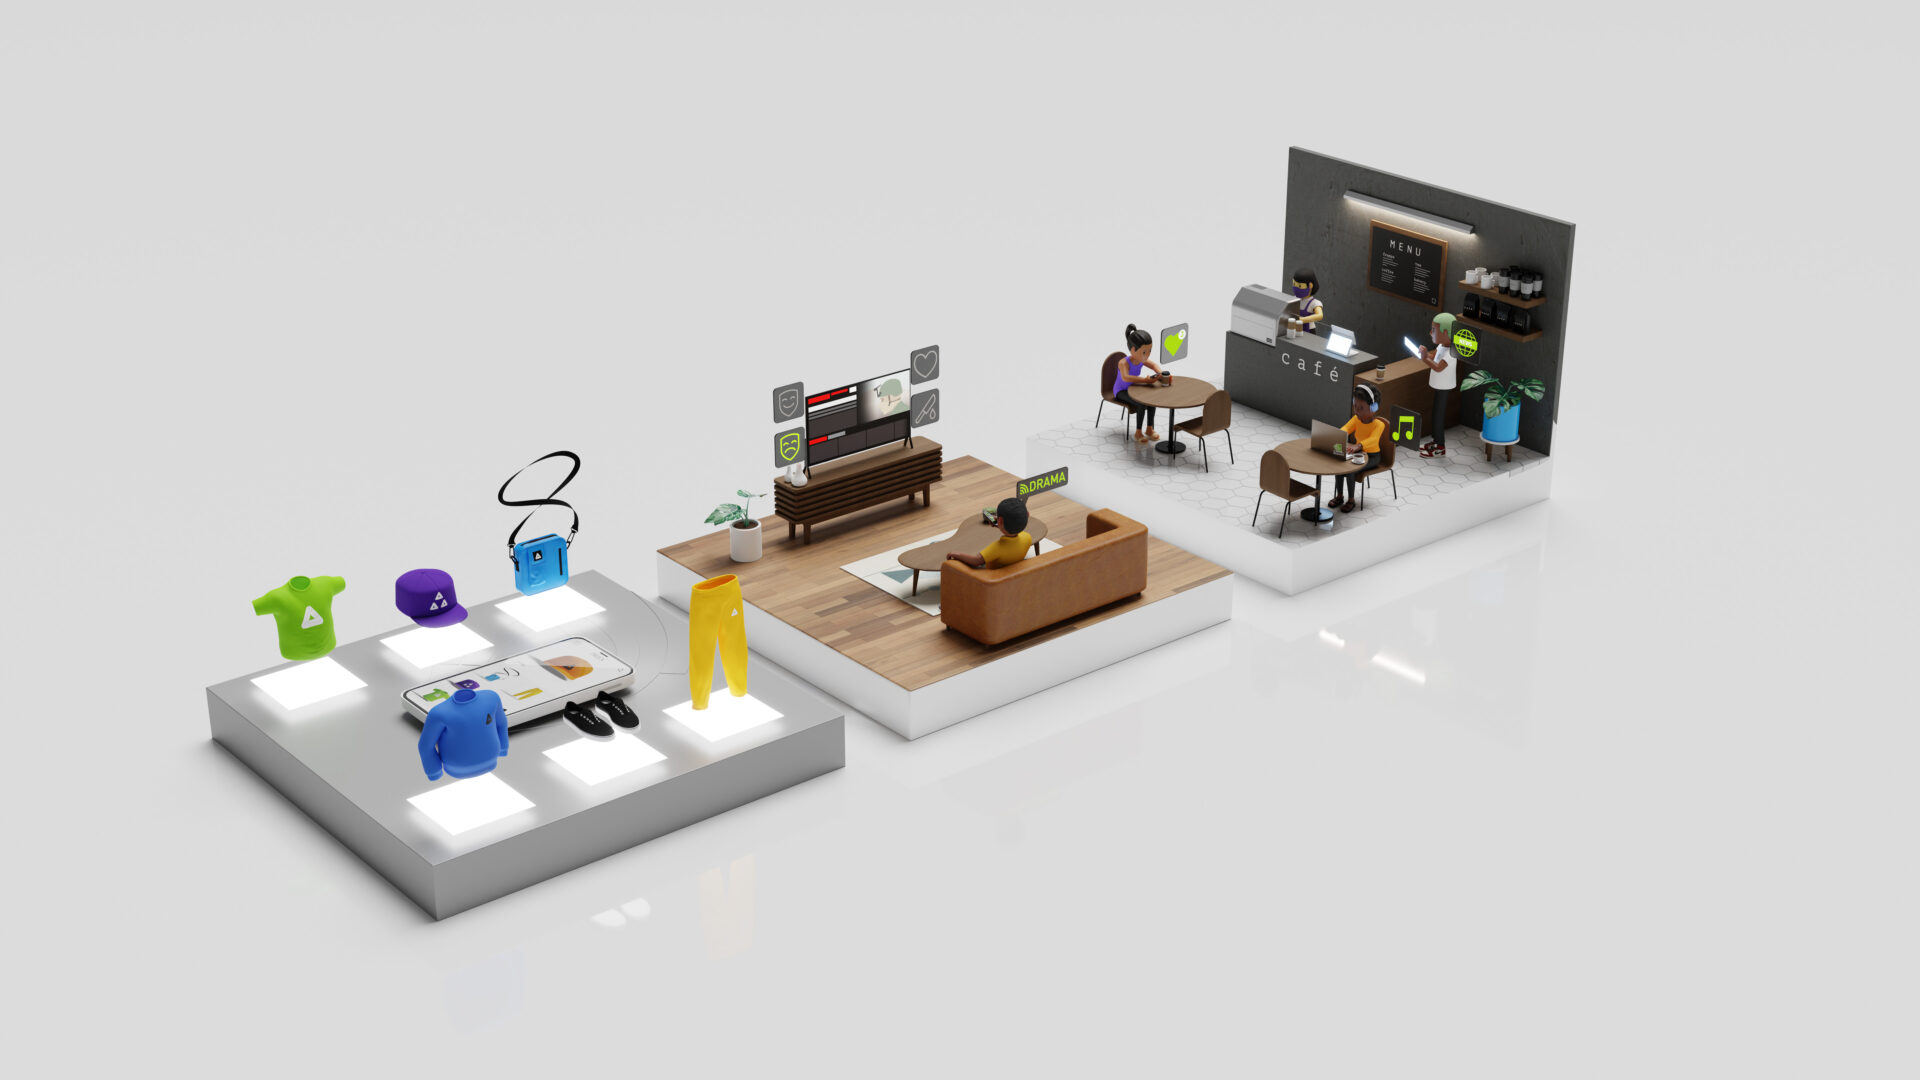 Illustration showing a shopping scene, video streaming in living room, and cafe all with recommender activities.